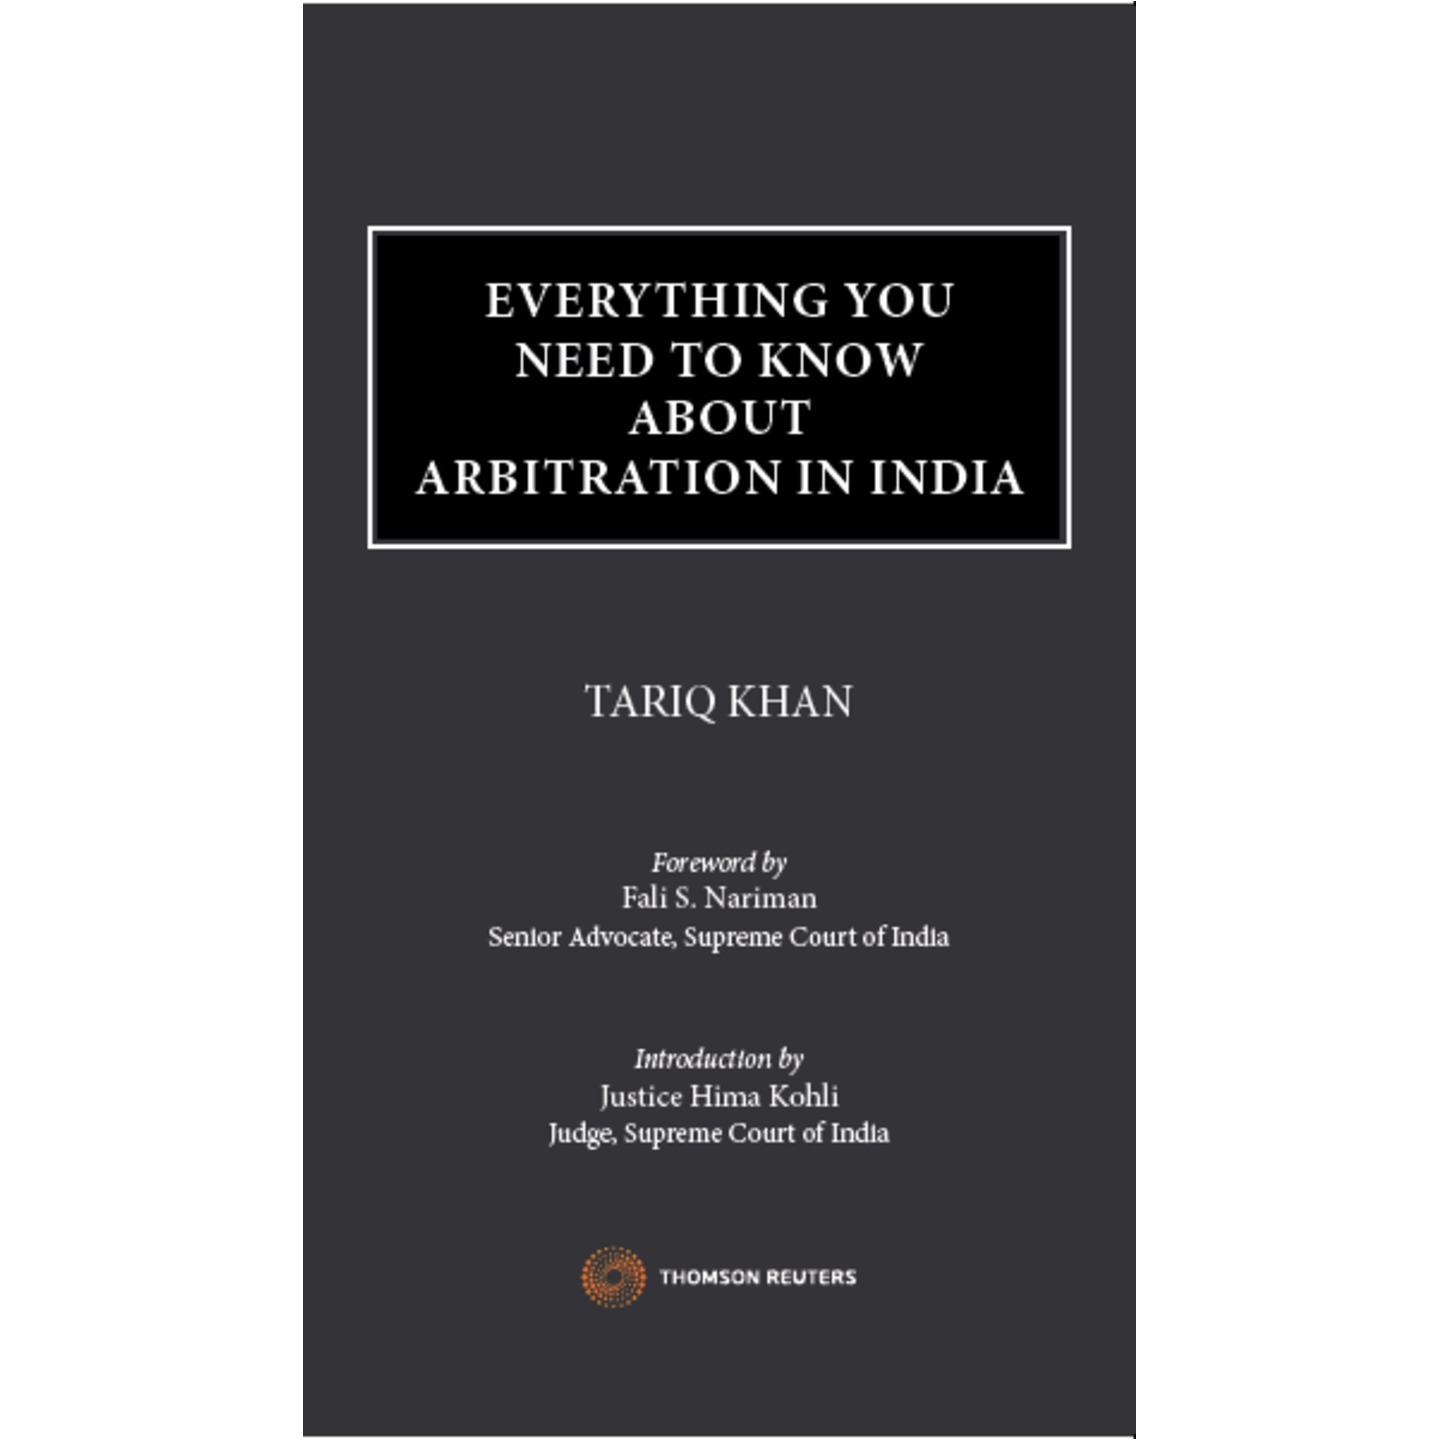 Everything You Need to Know about Arbitration in India